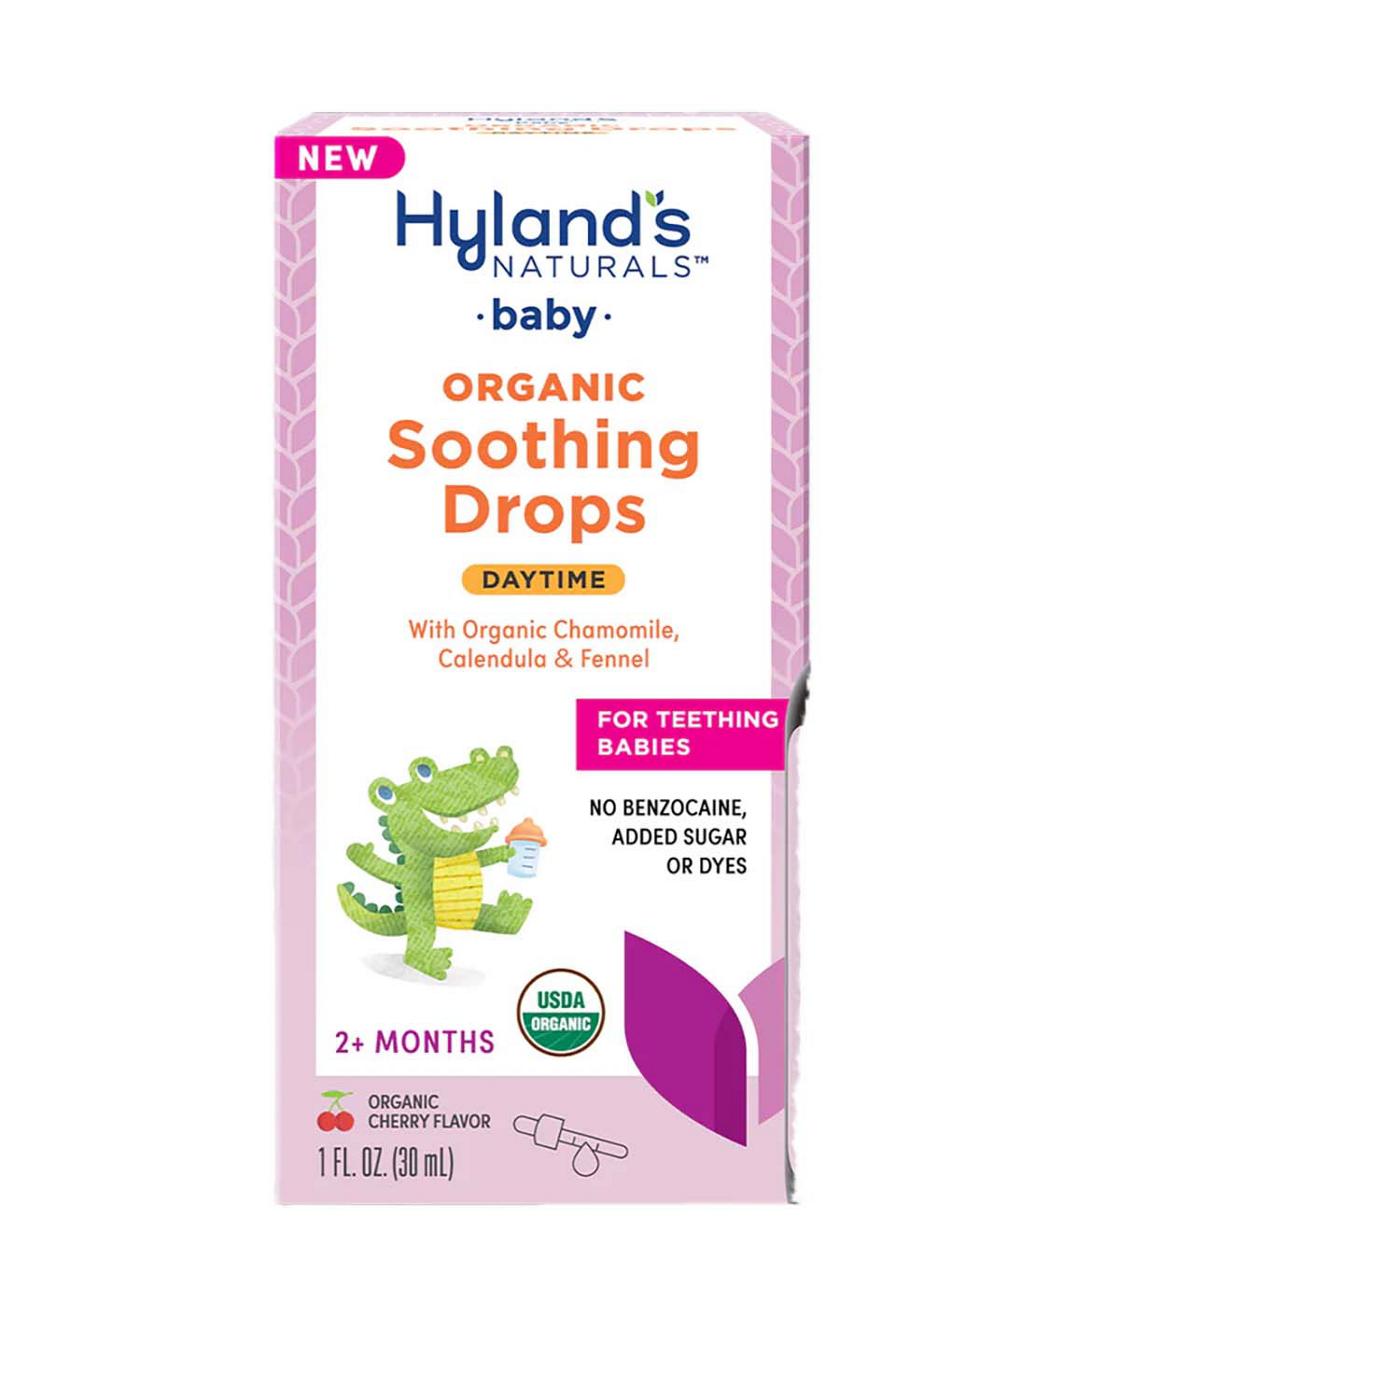 Hyland's Naturals Baby Organic Soothing Drops Daytime -Cherry; image 1 of 4